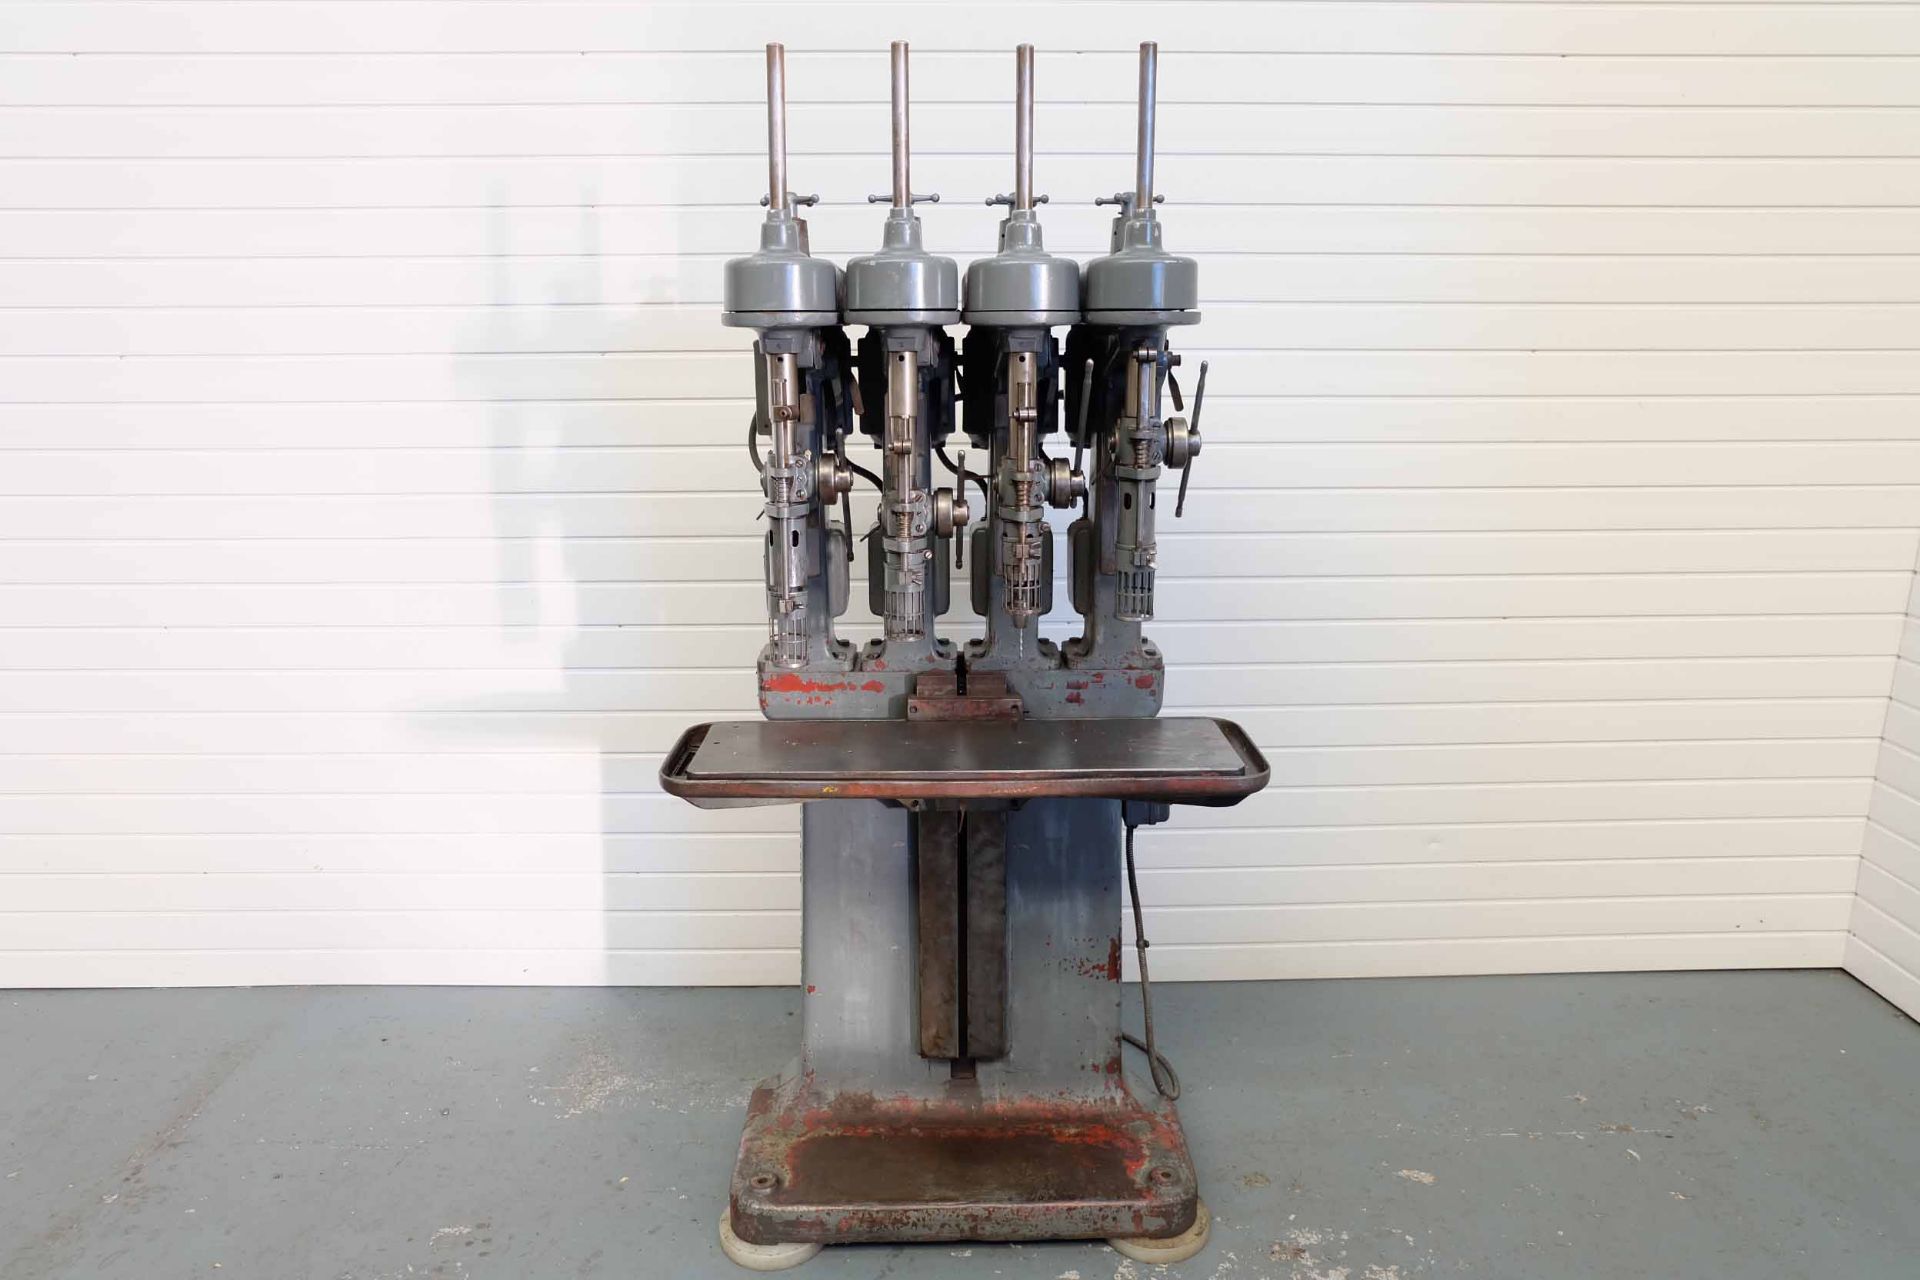 Pollard Corona Model 1EX 4 Spindle In-Line Drilling Machine. Table Size 33" x 10". Throat 7". Spindl